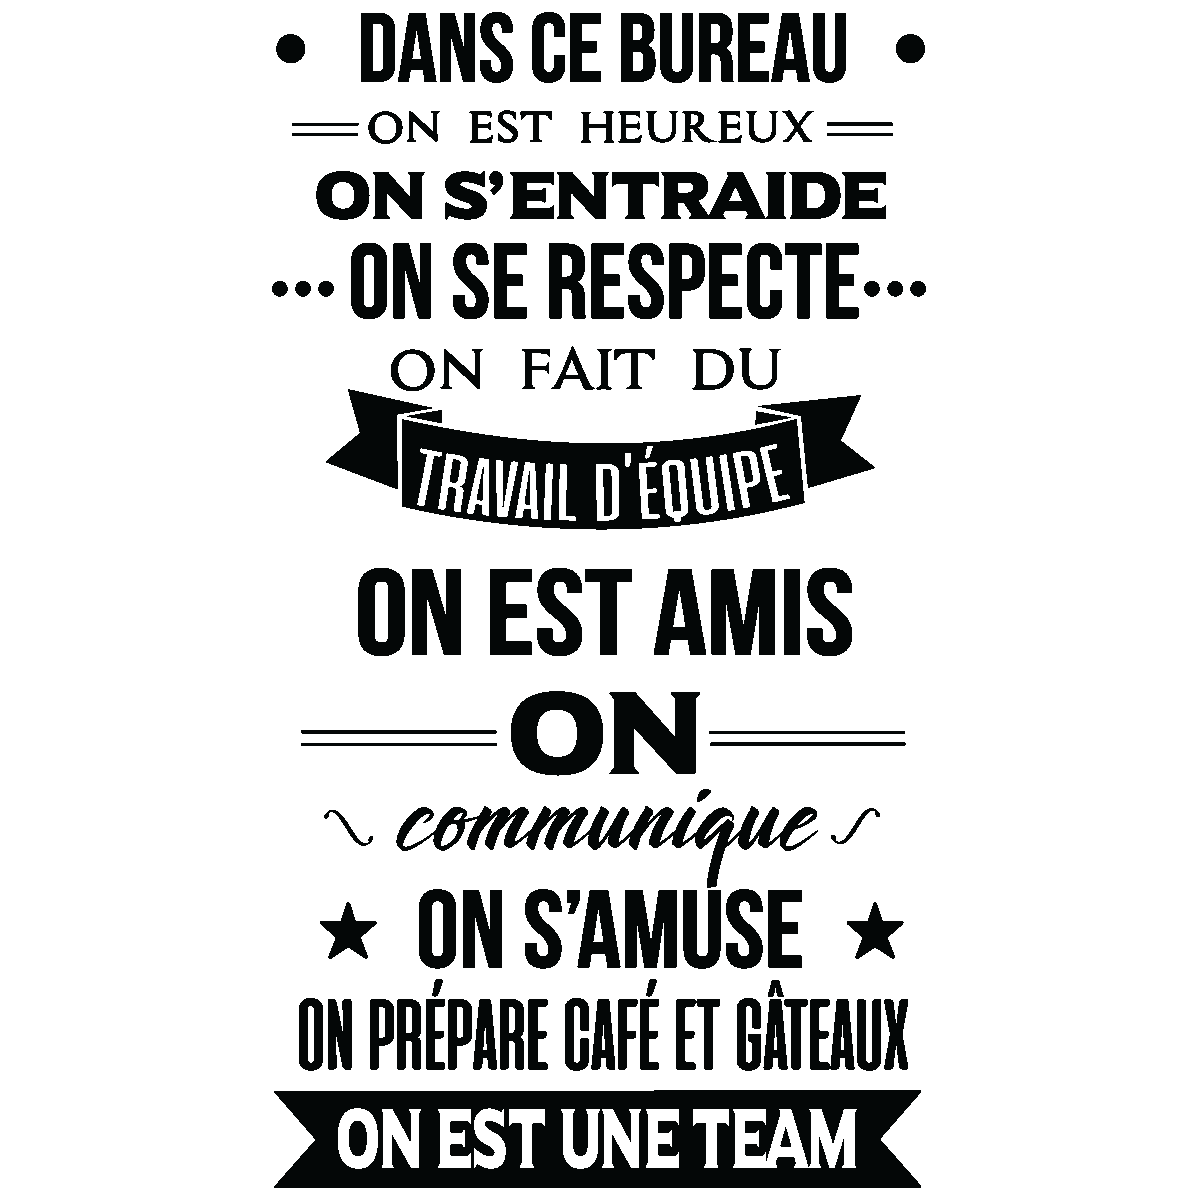 Quote Wall Decal Dans Ce Bureau On Est Une Team Wall Decals Quote Wall Stickers French Ambiance Sticker